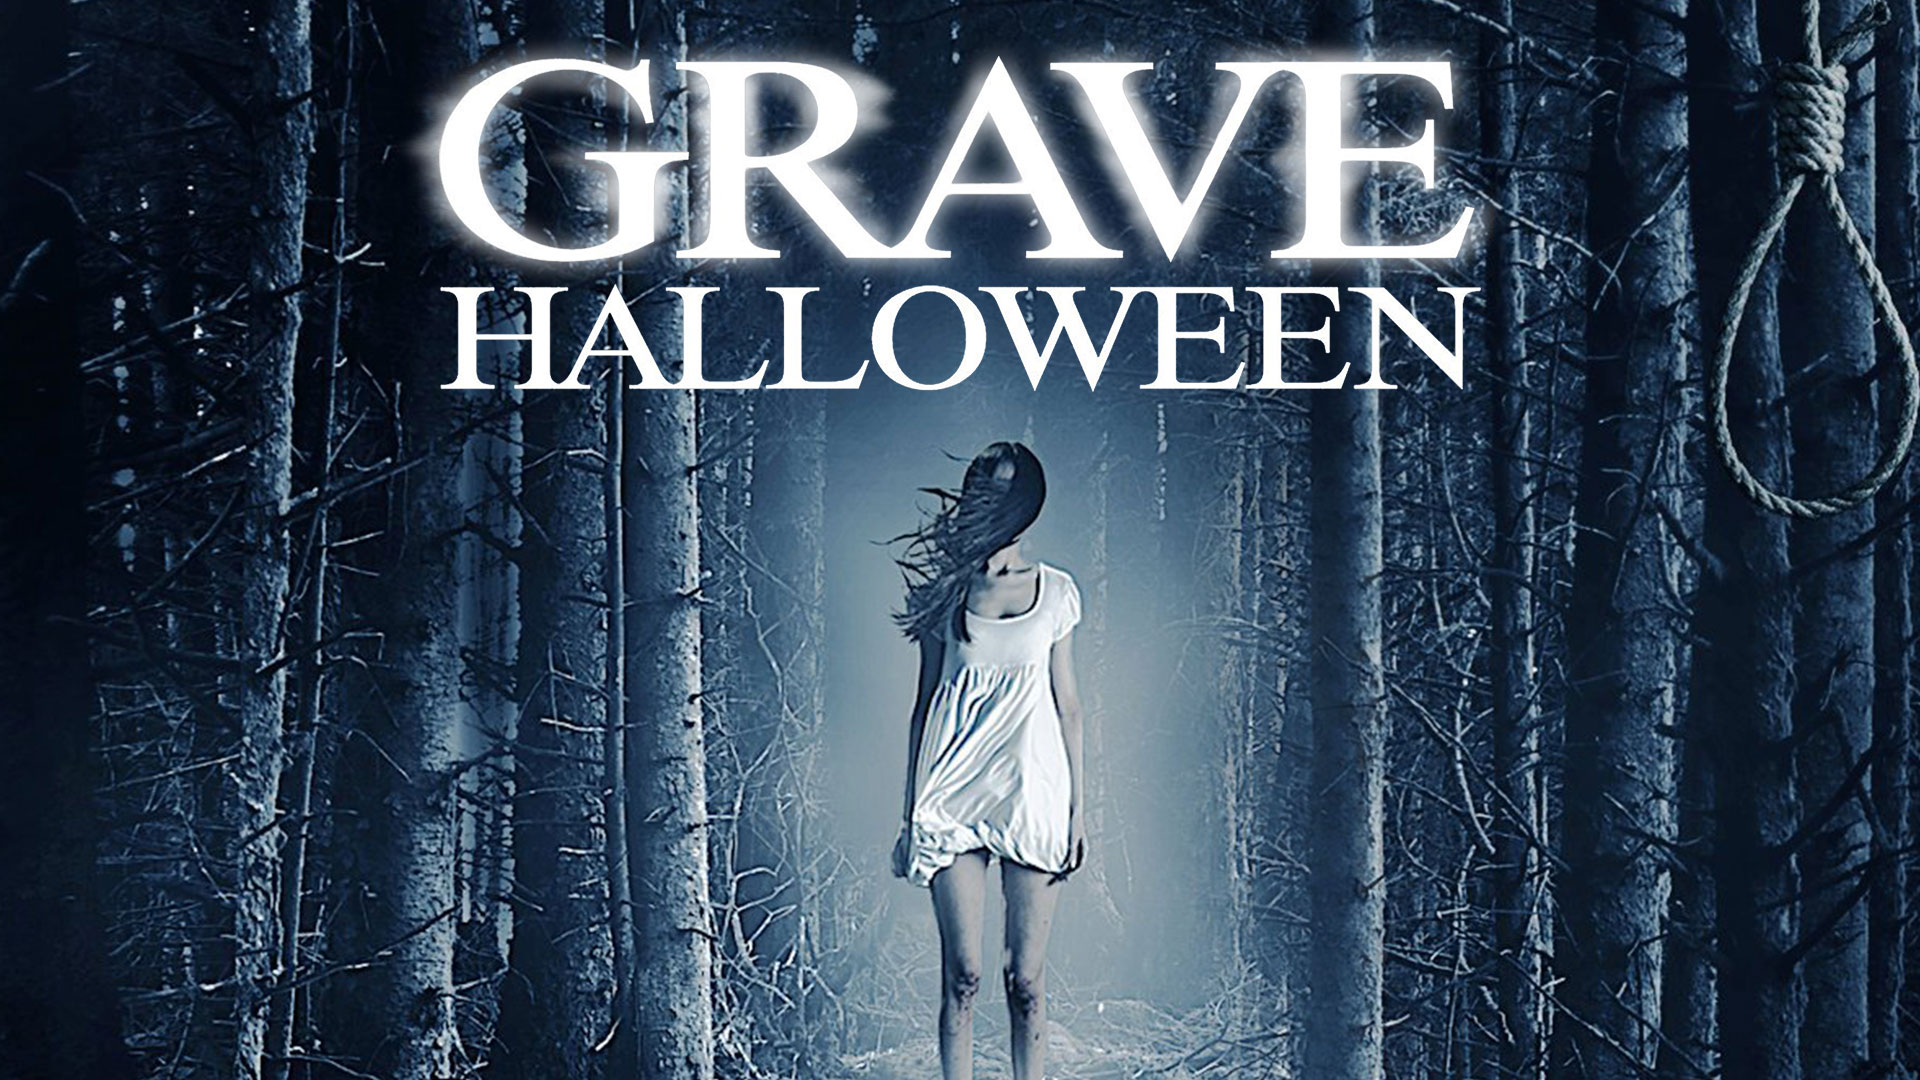 Grave Halloween, 2013 – Horror Movies Reviews